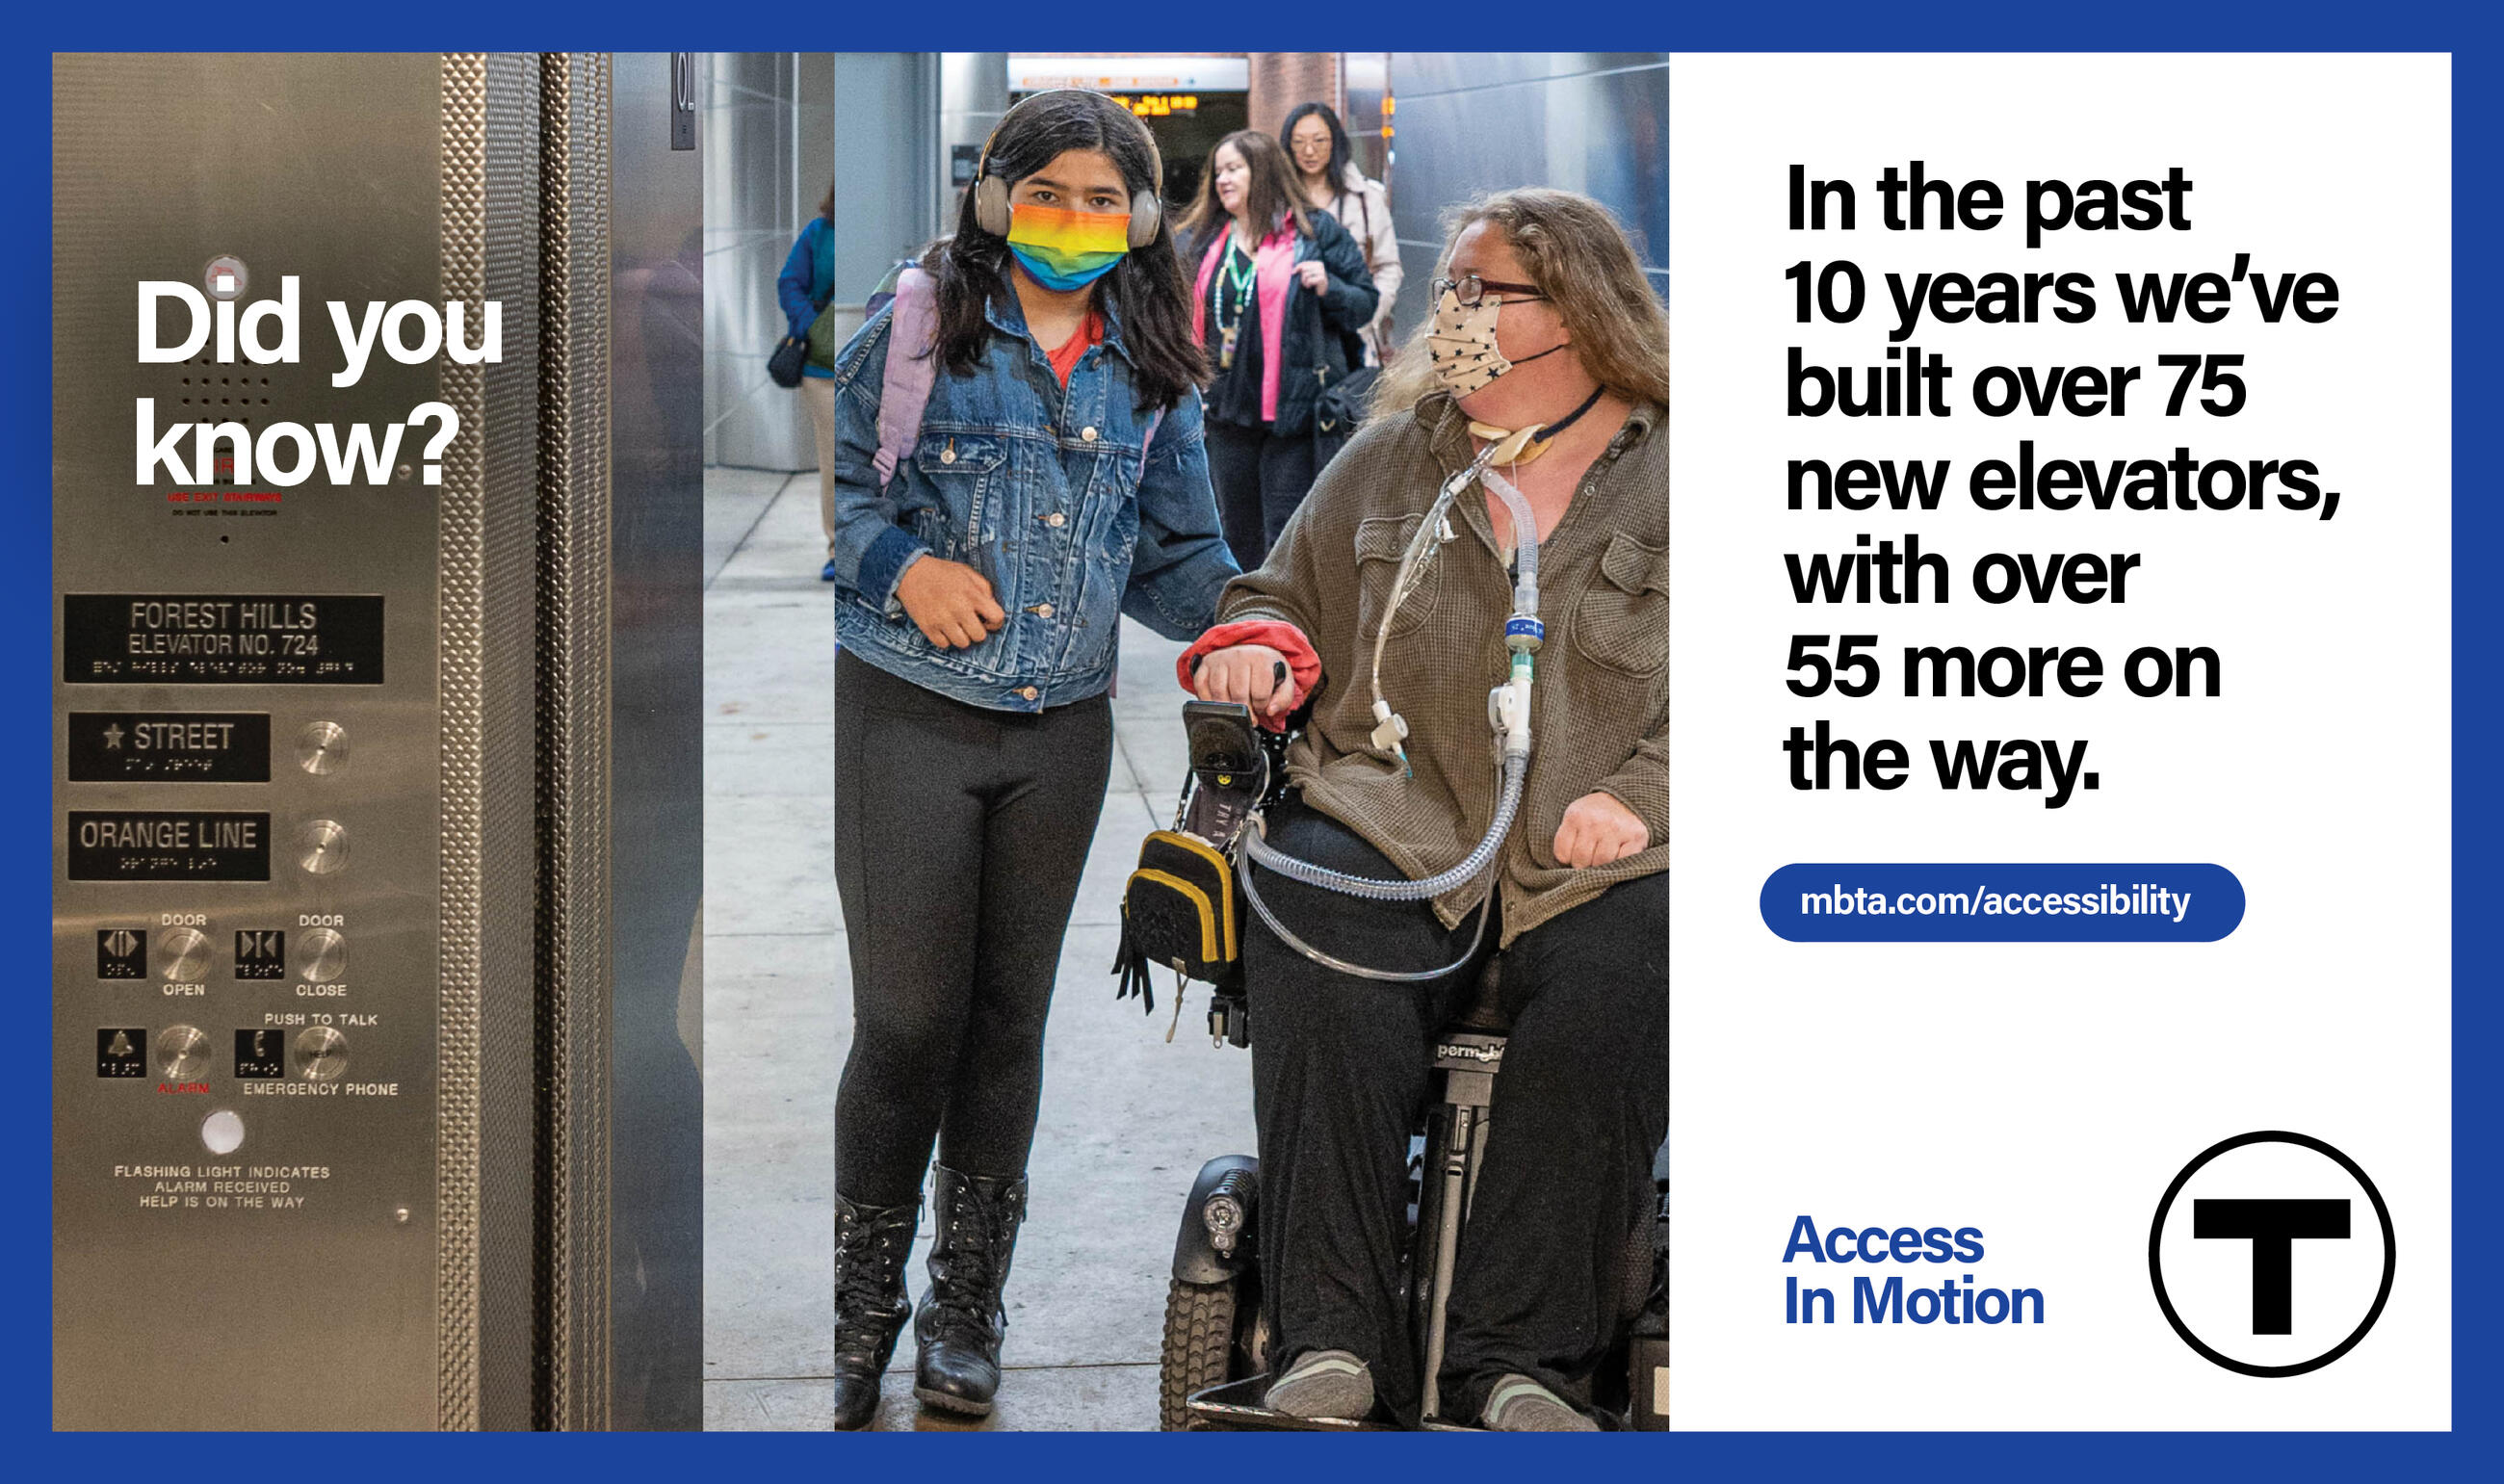 Spanning the left and center panels: A white woman using a power wheelchair and a ventilator enters an elevator with a young Asian girl wearing a mask. Inside the elevator, floor buttons are labeled in tactile print and braille. The words “Did you know?” appear in the foreground. Right panel (text): “In the past 10 years, we’ve built over 75 new elevators, with over 55 more on the way. mbta.com/accessibility” followed by the “Access In Motion” tagline and the T logo.